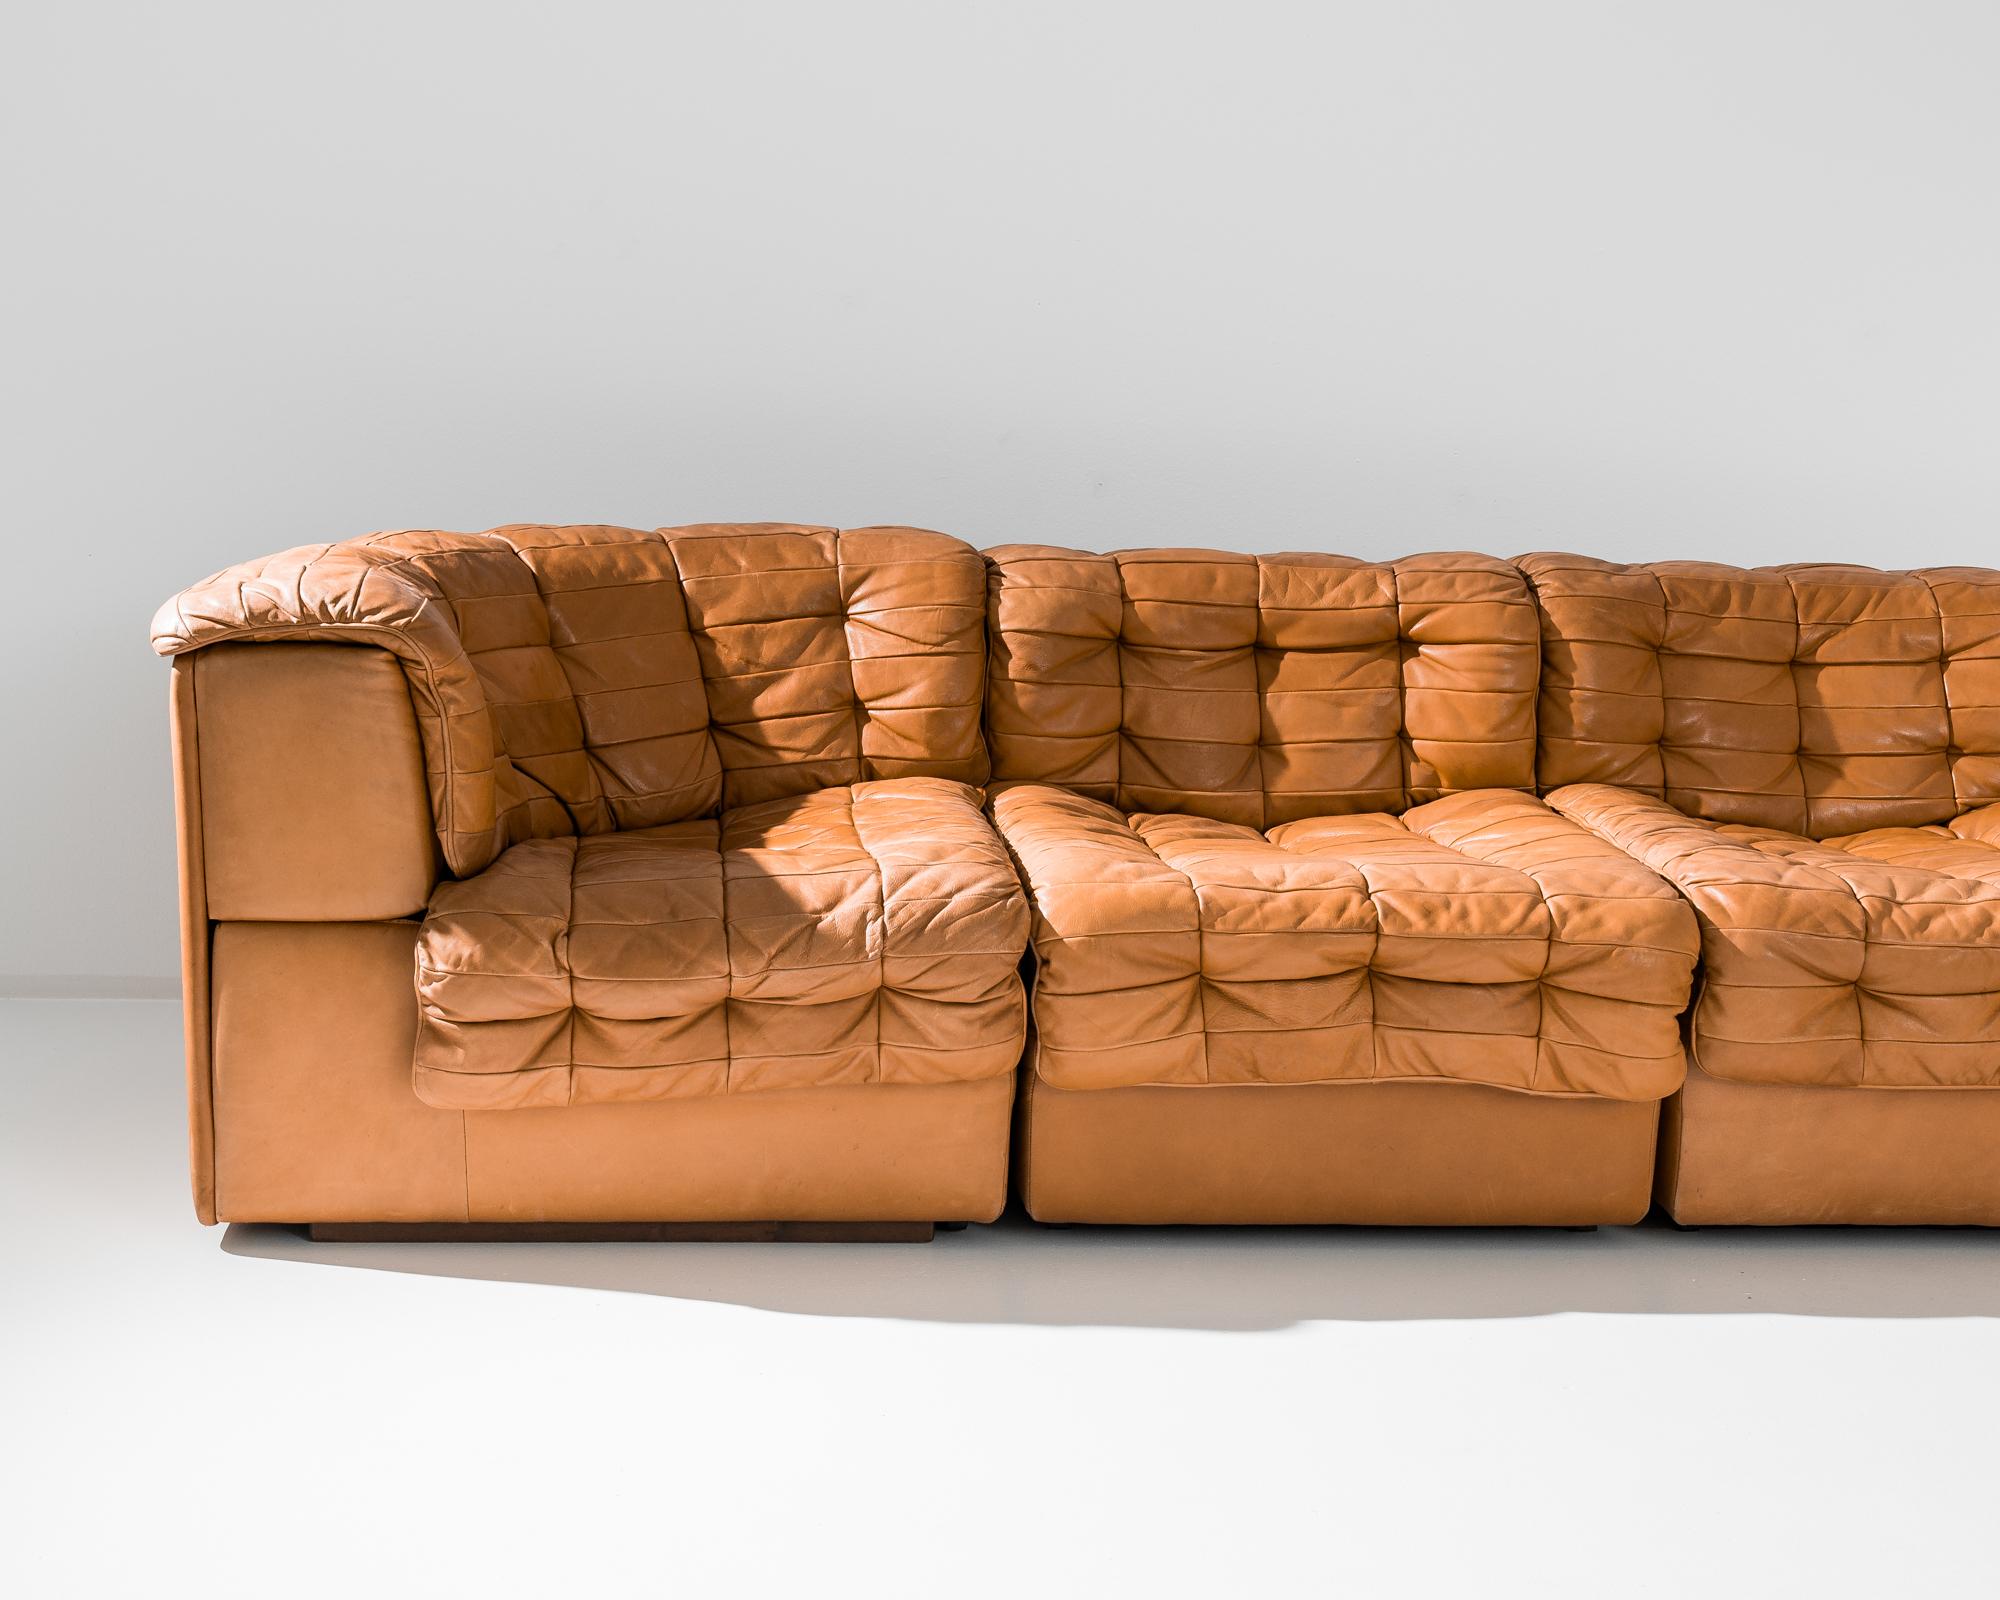 An upholstered leather modular sofa made circa 1970 by the iconic company De Sede, a Swiss manufacturer of exclusive furniture. A stunning tawny angled sofa, this hand-crafted leather piece lays full focus on comfort and authentic design. The cubic